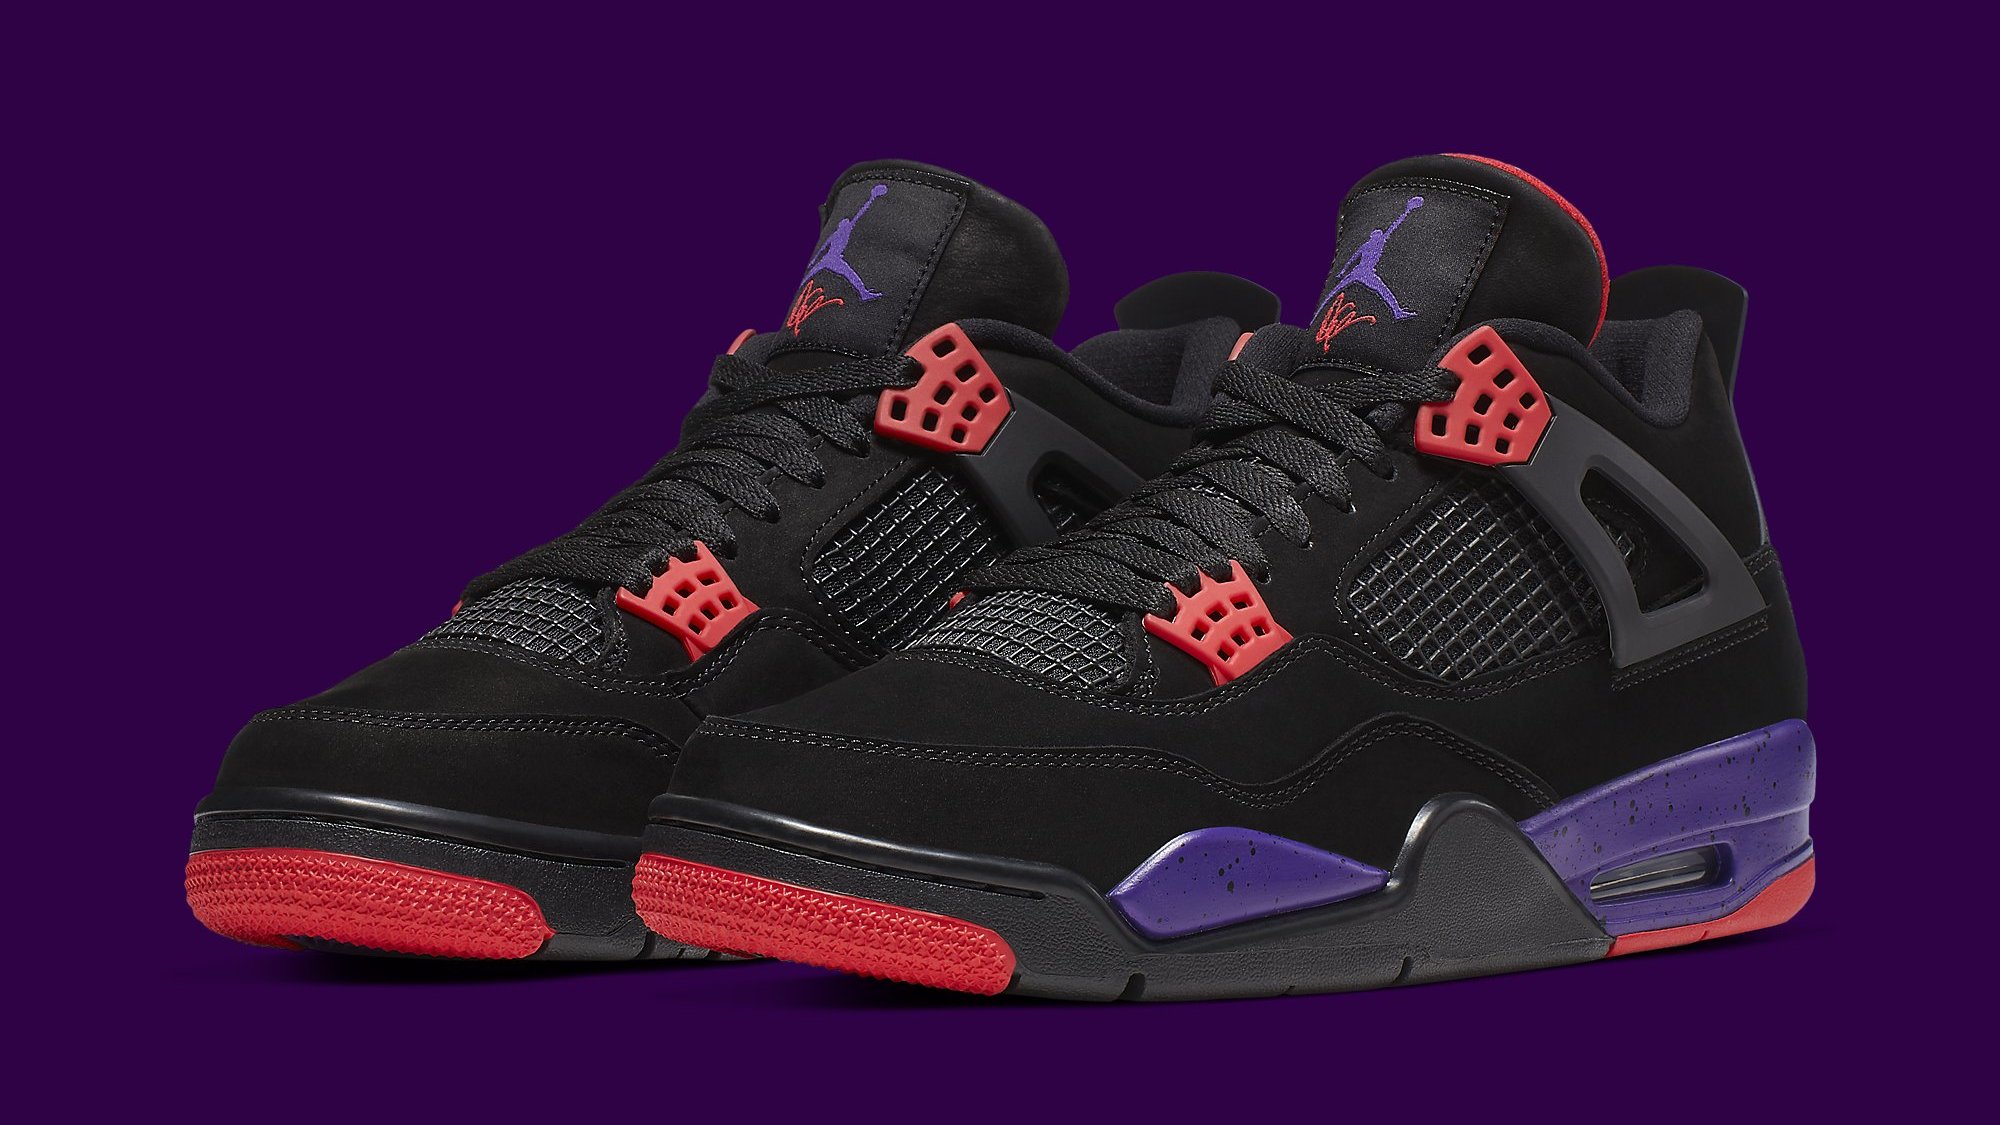 Raptors' Air Jordan Re-Releases with Drake's Signature on the